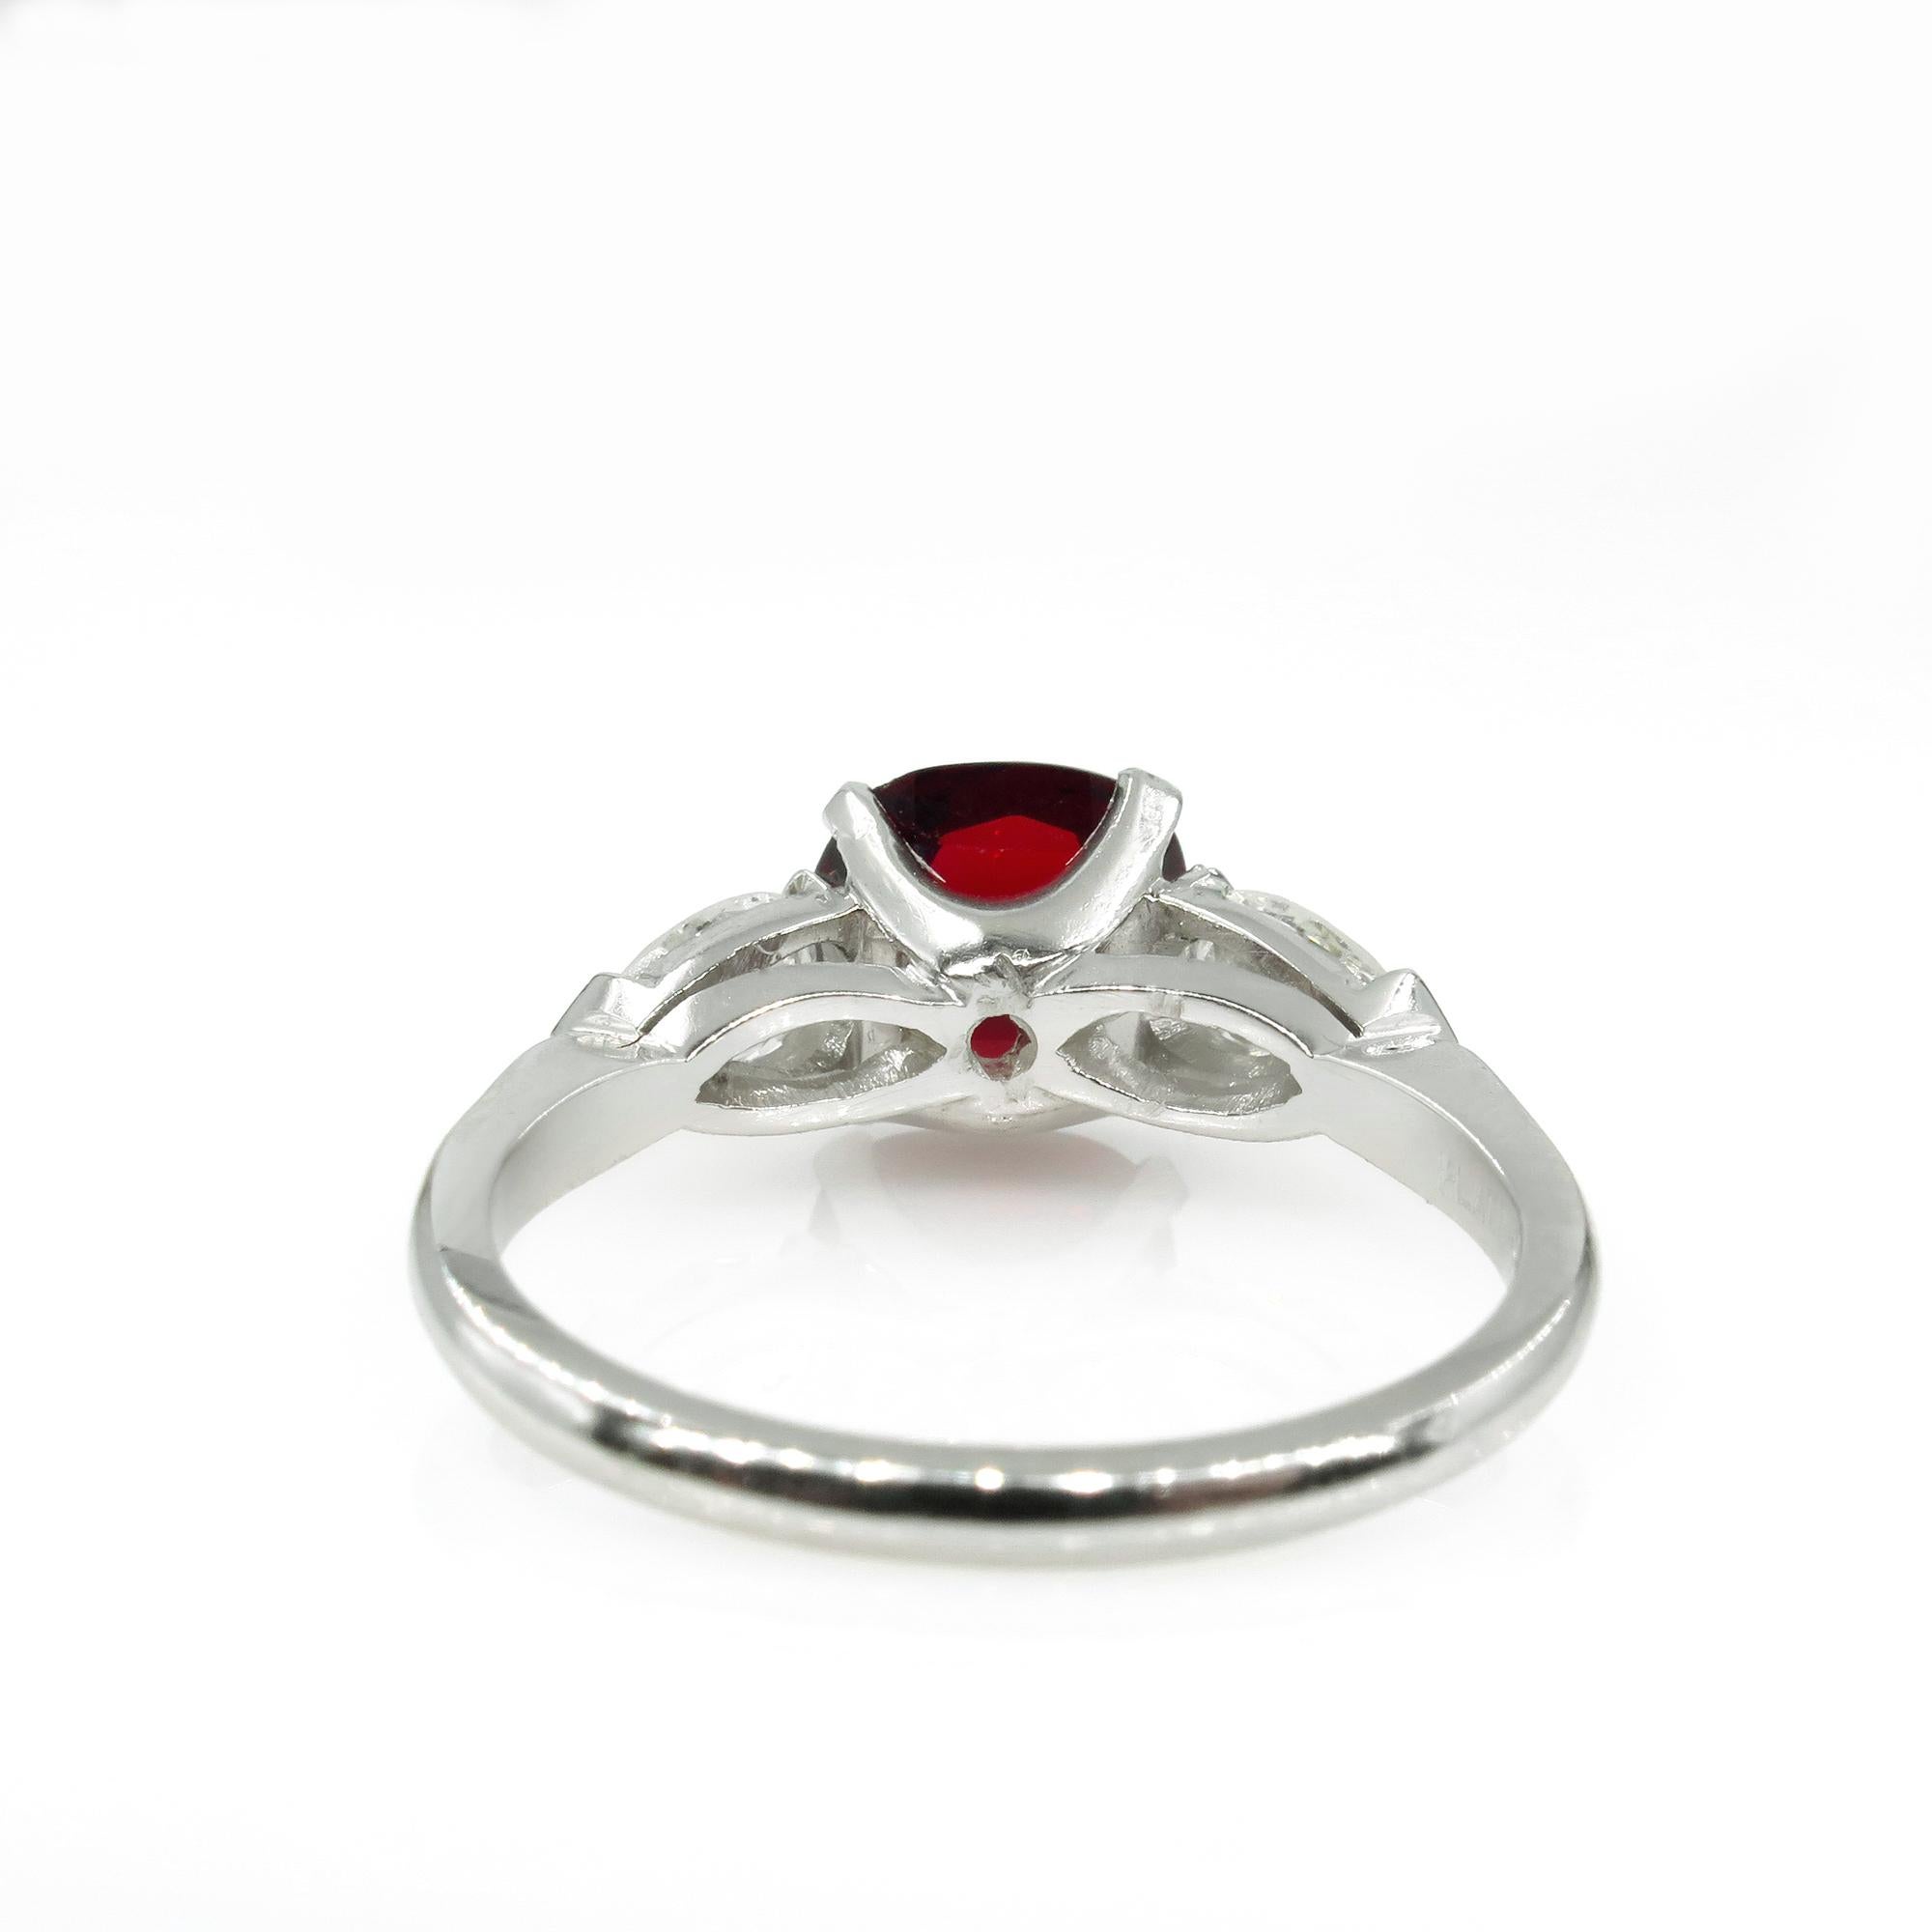 Women's GIA 2.85ct Natural Burma No-Heat Red Spinel and Diamond Platinum 3-Stone Ring